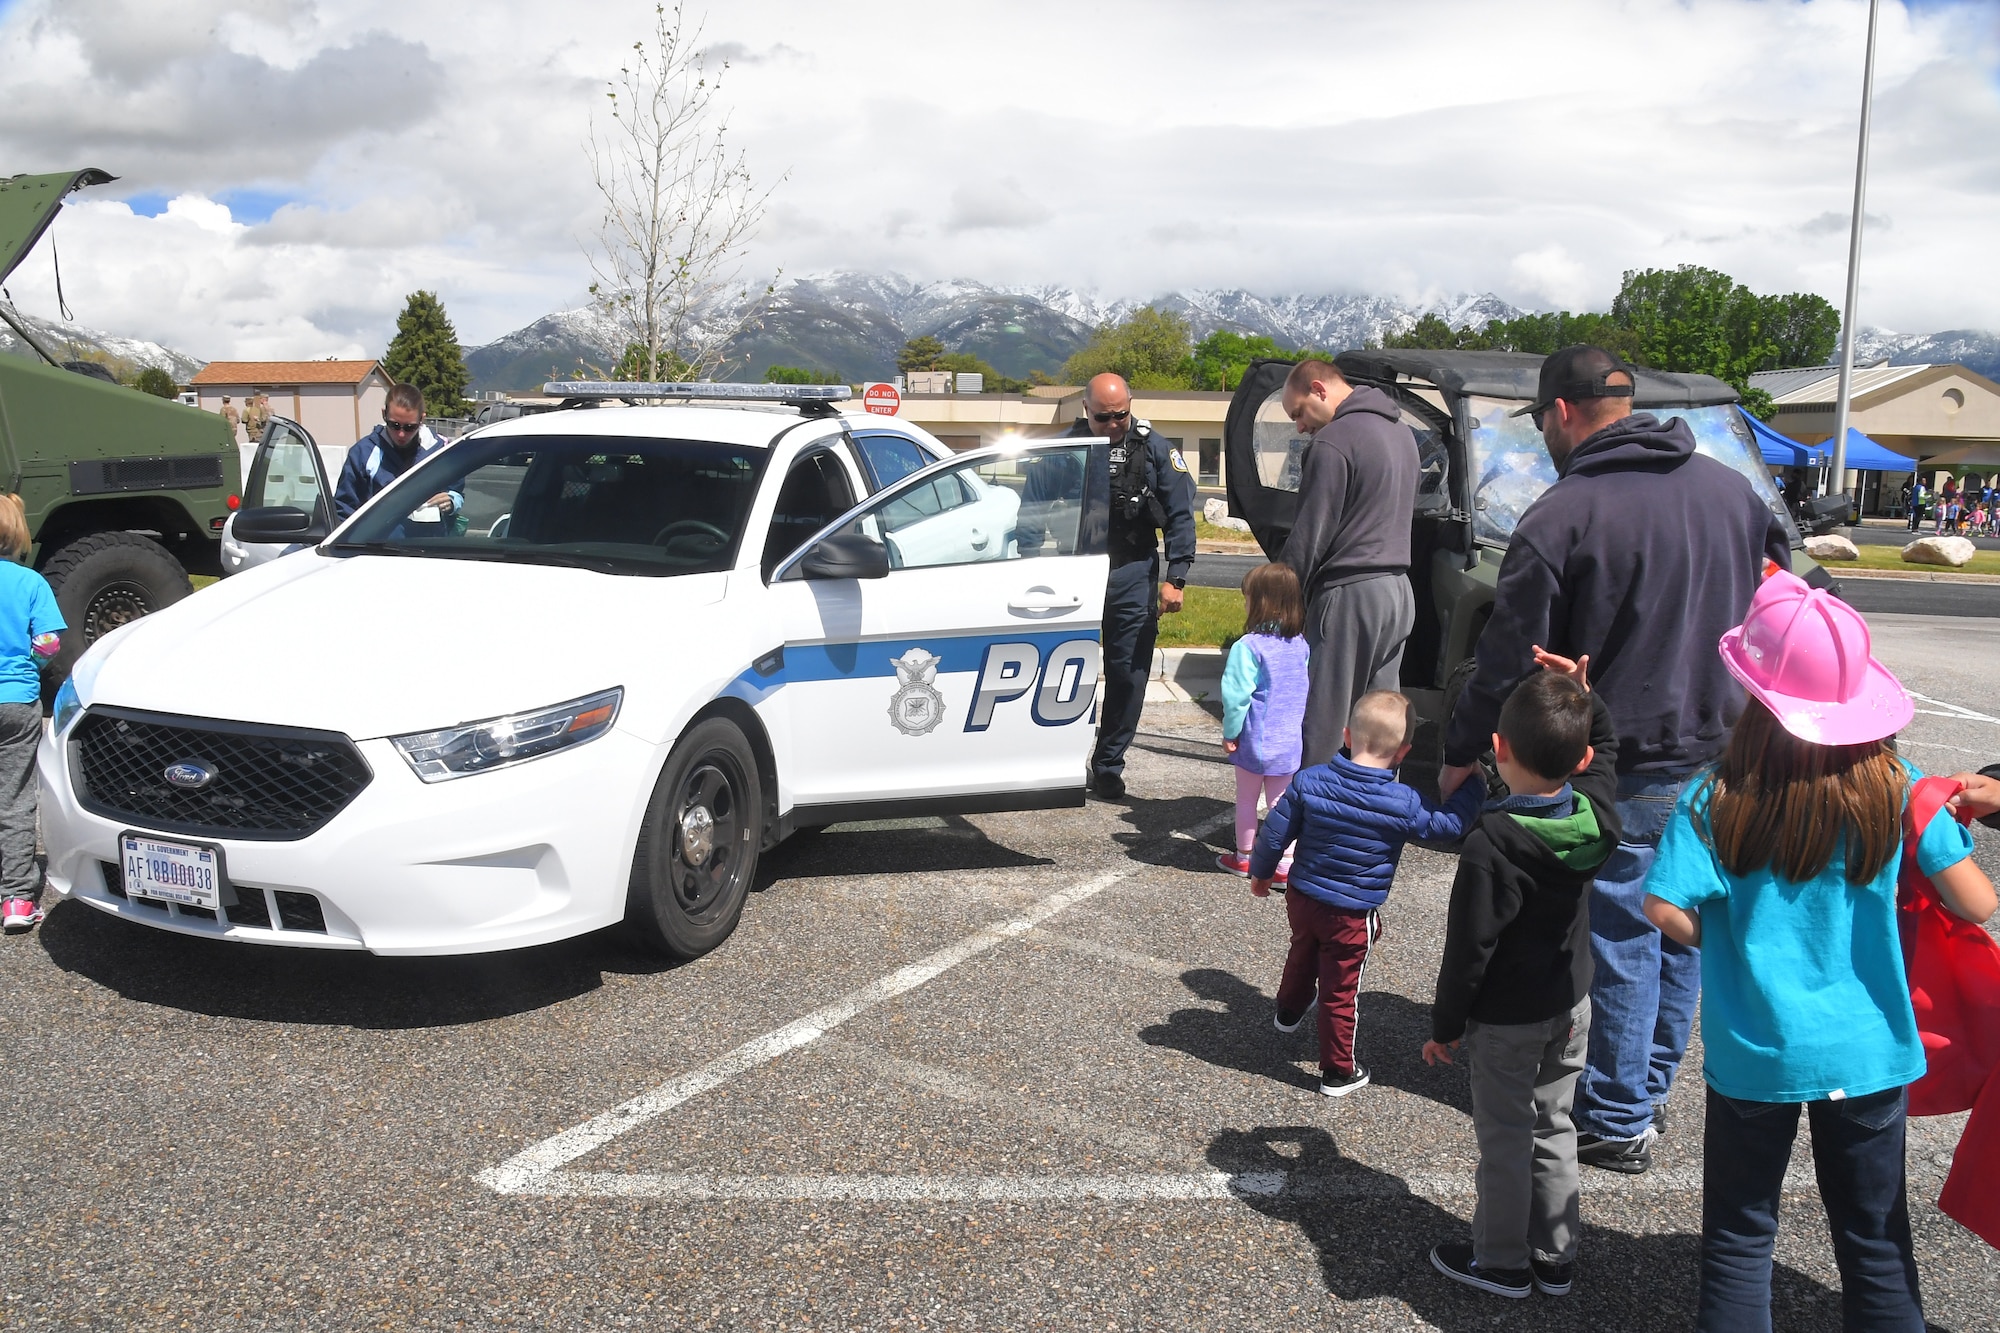 Roland Alforque, 75th Security Forces, shows children the inside of a police car, at the Wheels of Wonder event, May 17, 2019, Hill Air Force Base, Utah. (U.S. Air Force photo by Todd Cromar)